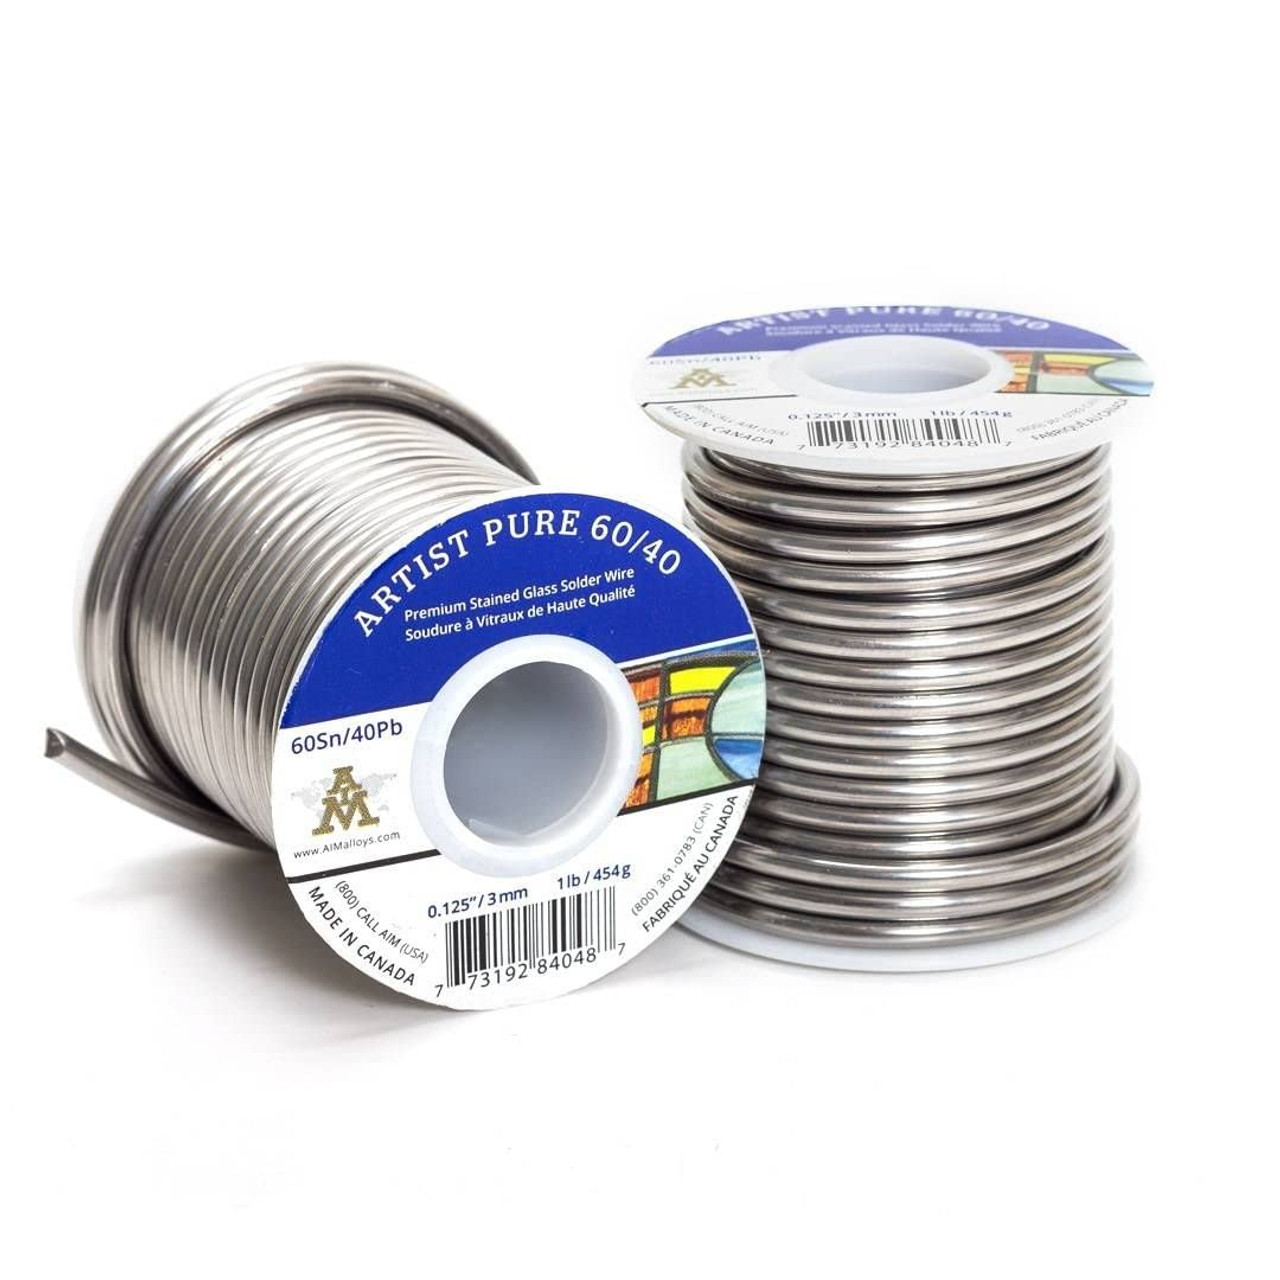 AIM Artist Pure 60/40 Stained Glass Solder, 0.125inch Dia, 1 Lb Spool